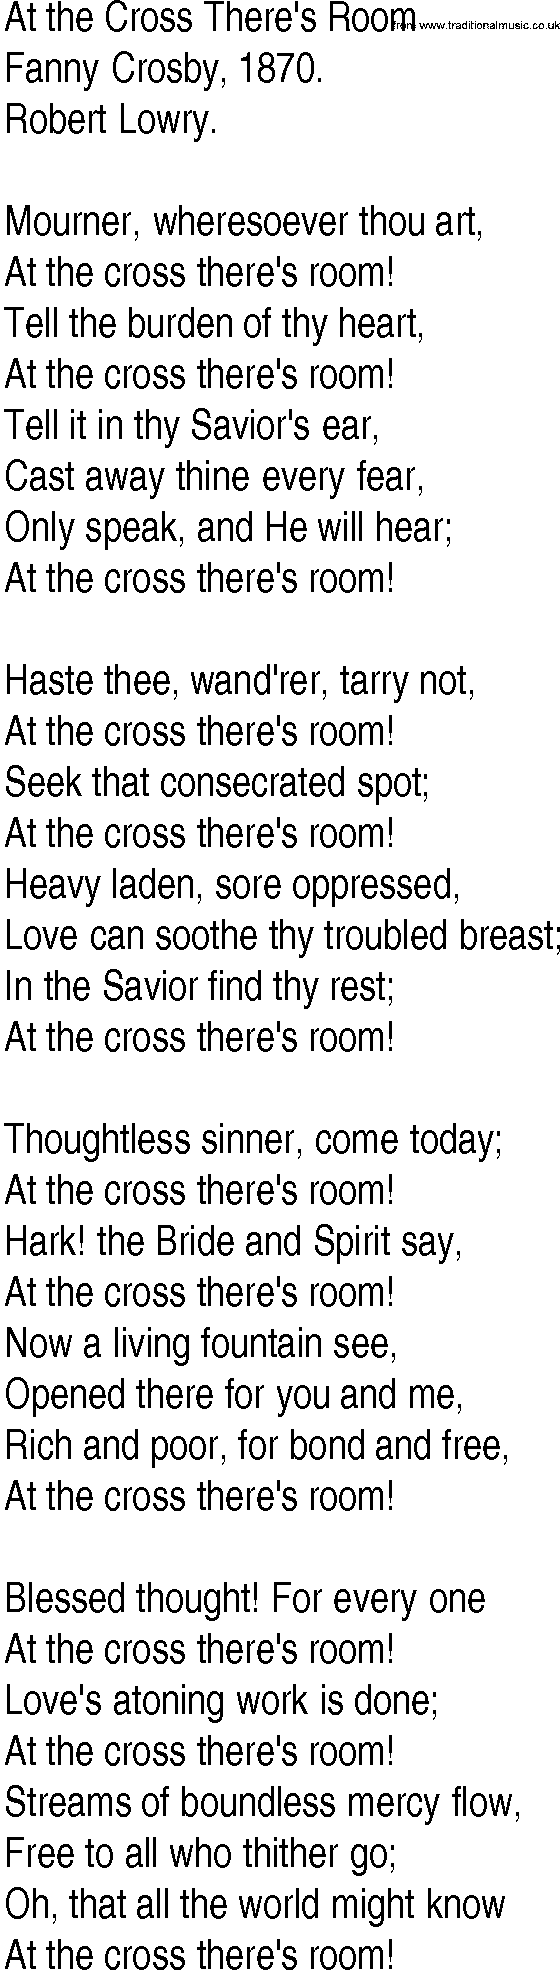 Hymn and Gospel Song: At the Cross There's Room by Fanny Crosby lyrics